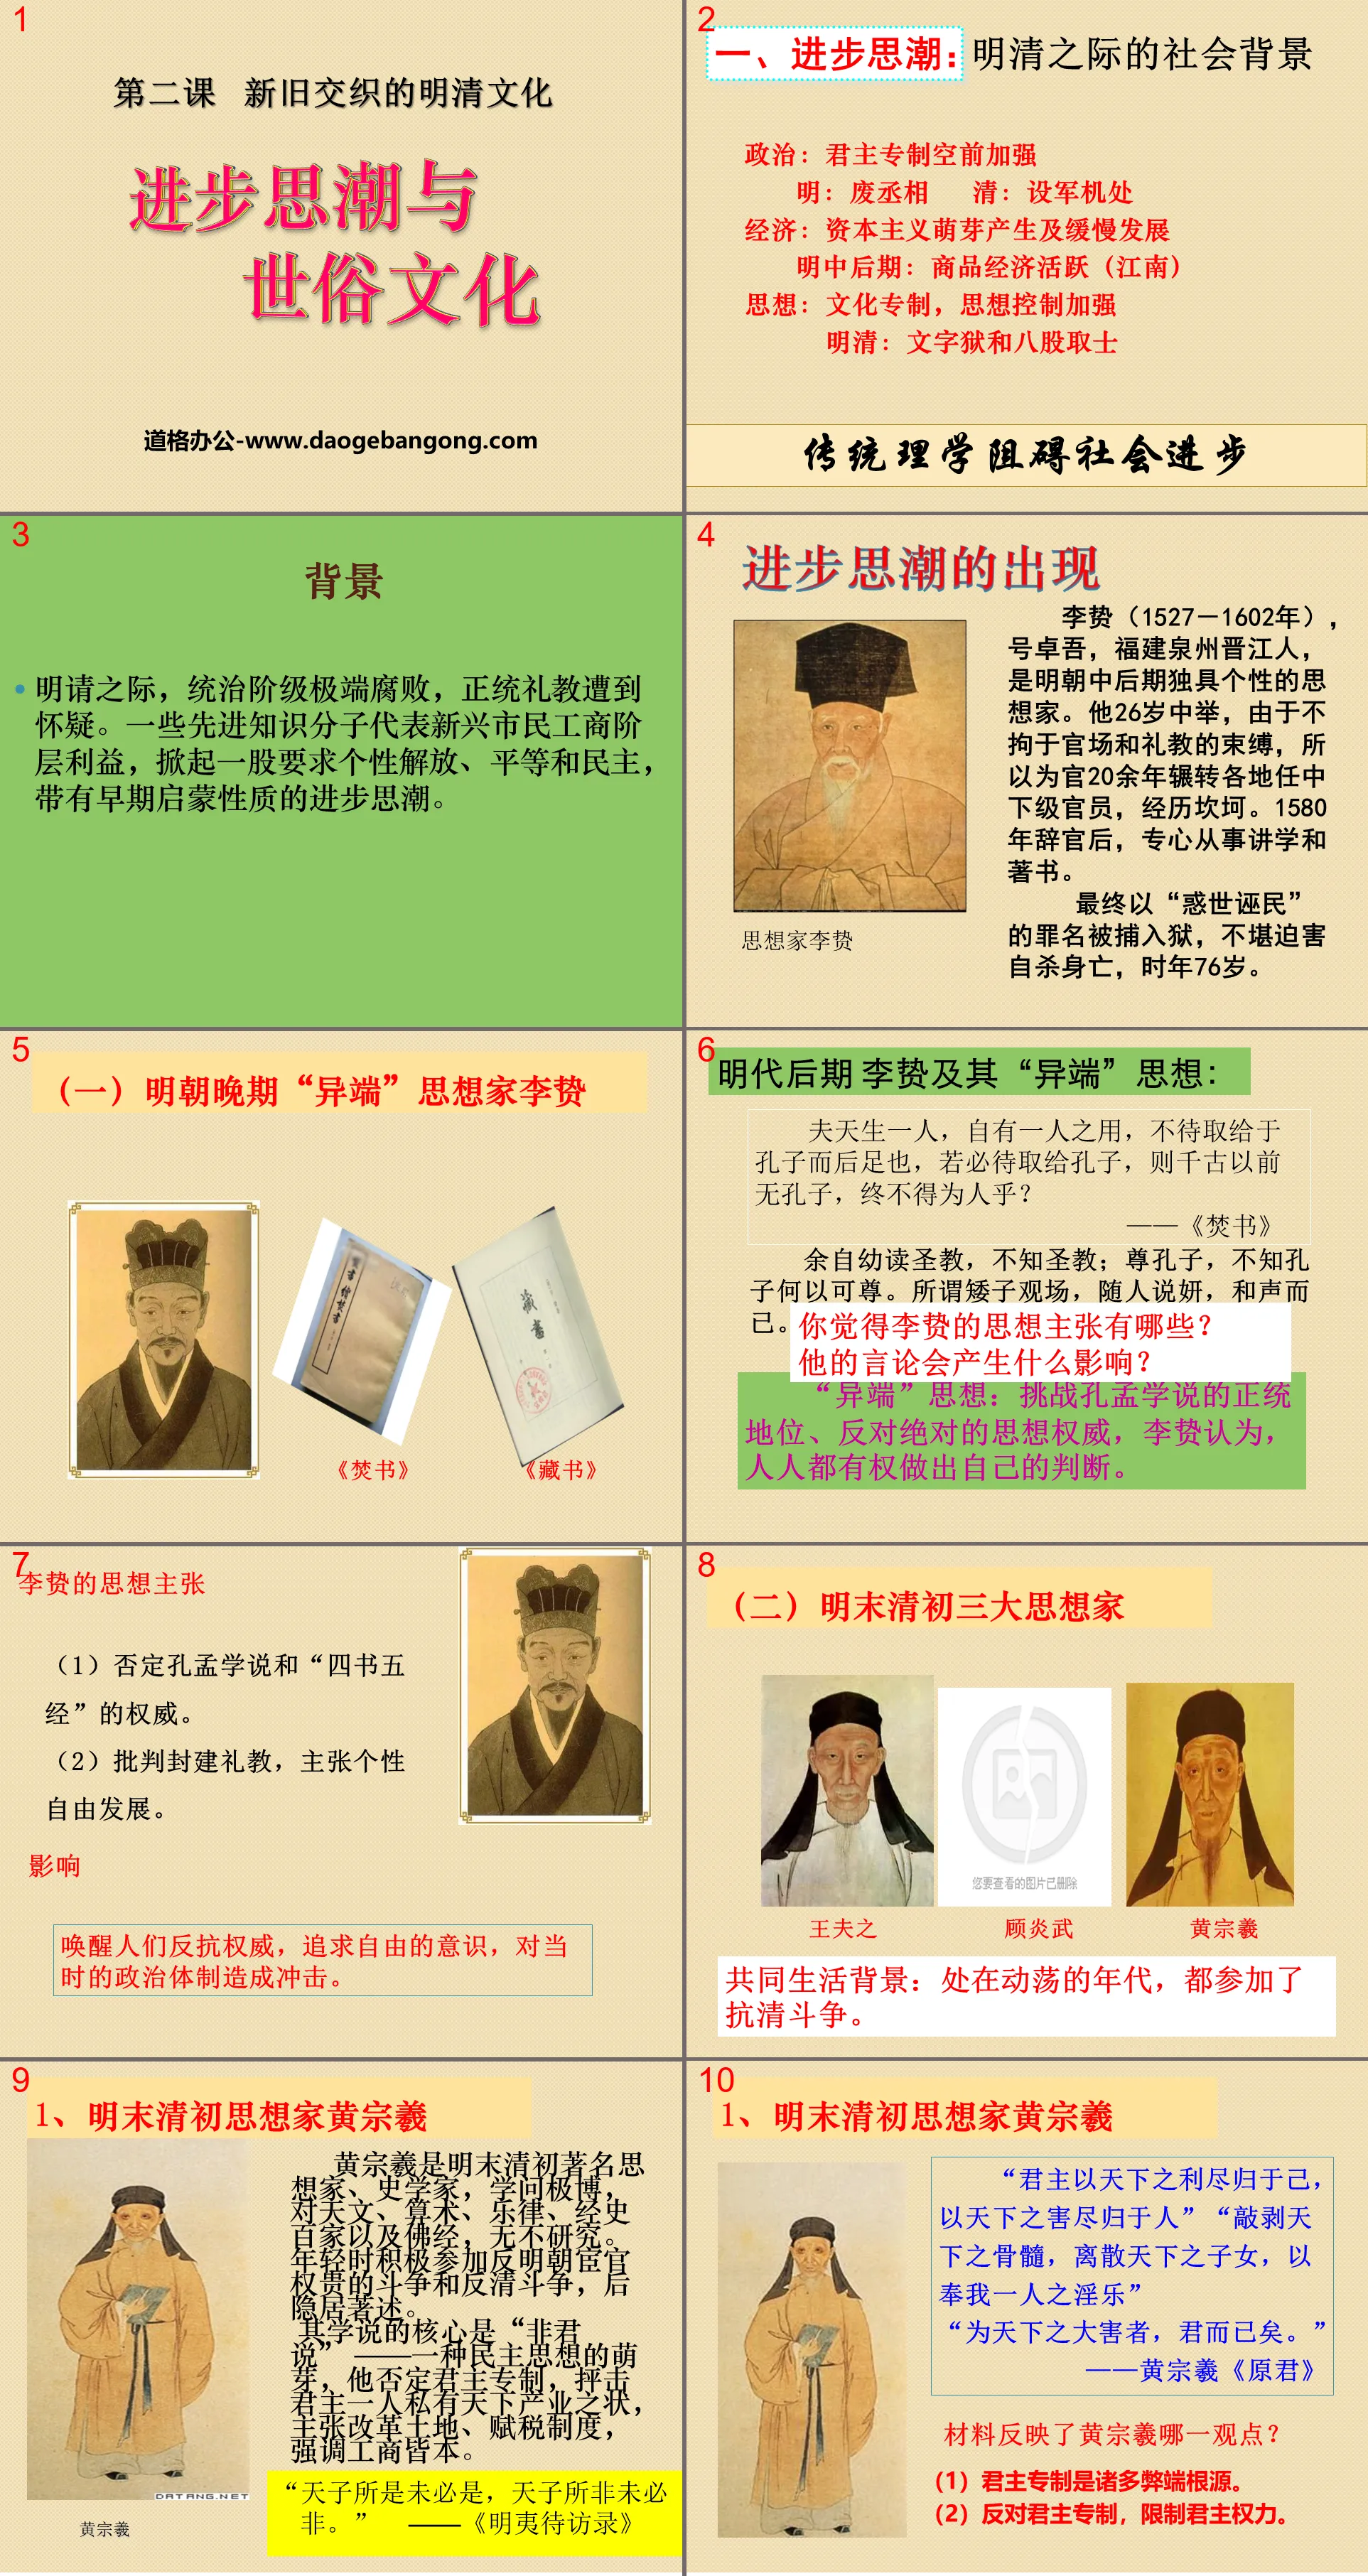 "Progressive Thoughts and Secular Culture" PPT courseware of Ming and Qing culture interweaving old and new